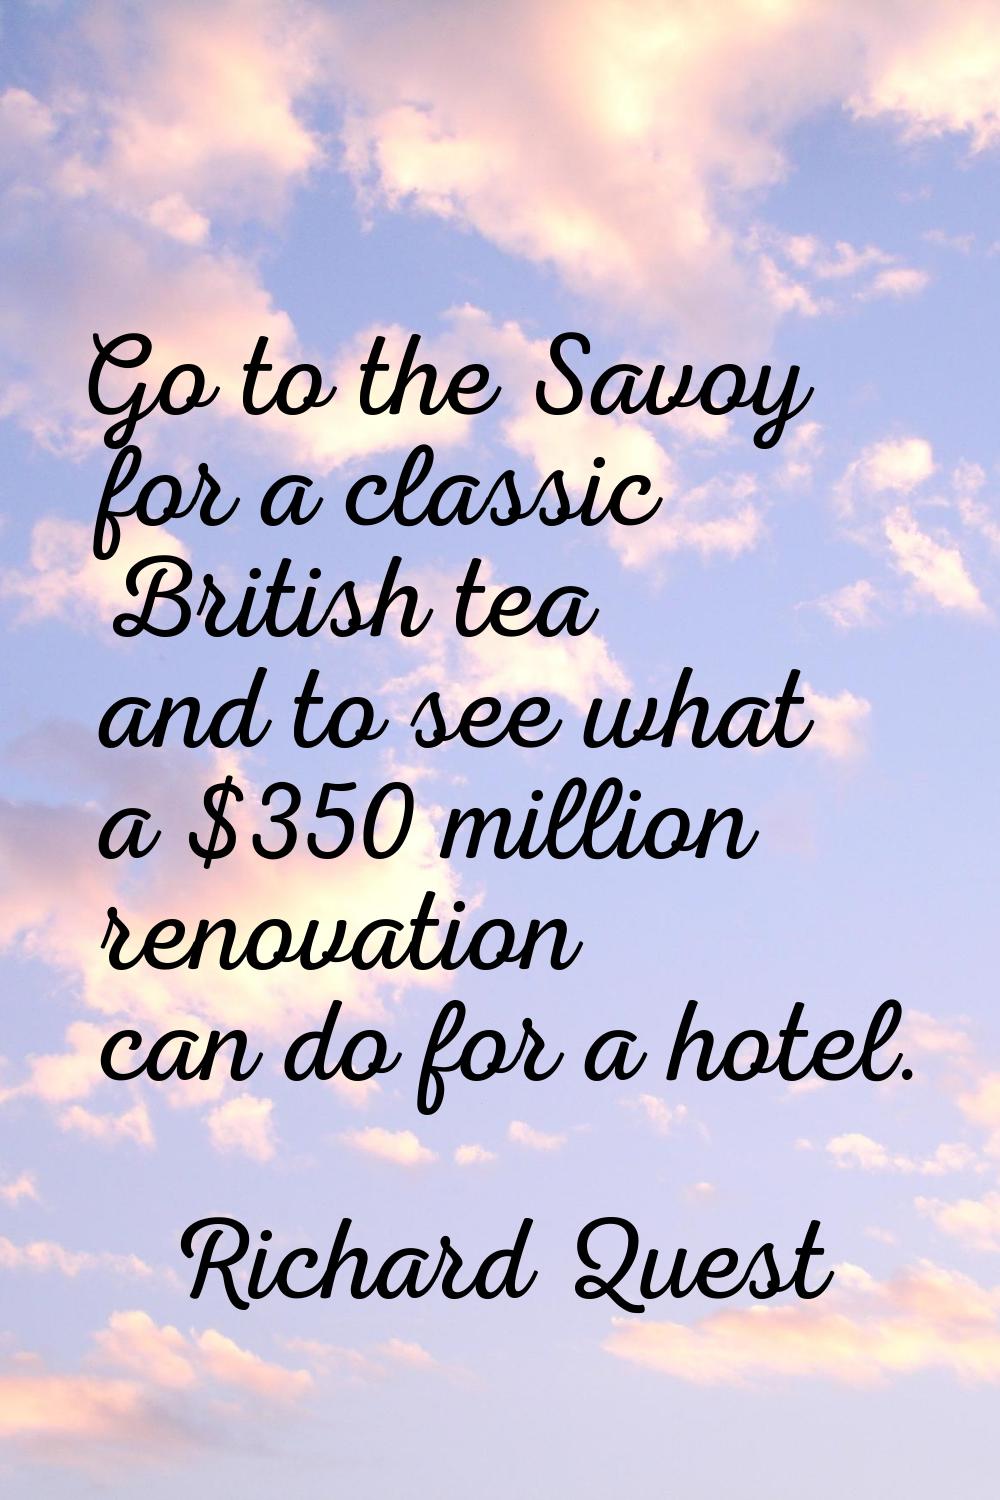 Go to the Savoy for a classic British tea and to see what a $350 million renovation can do for a ho